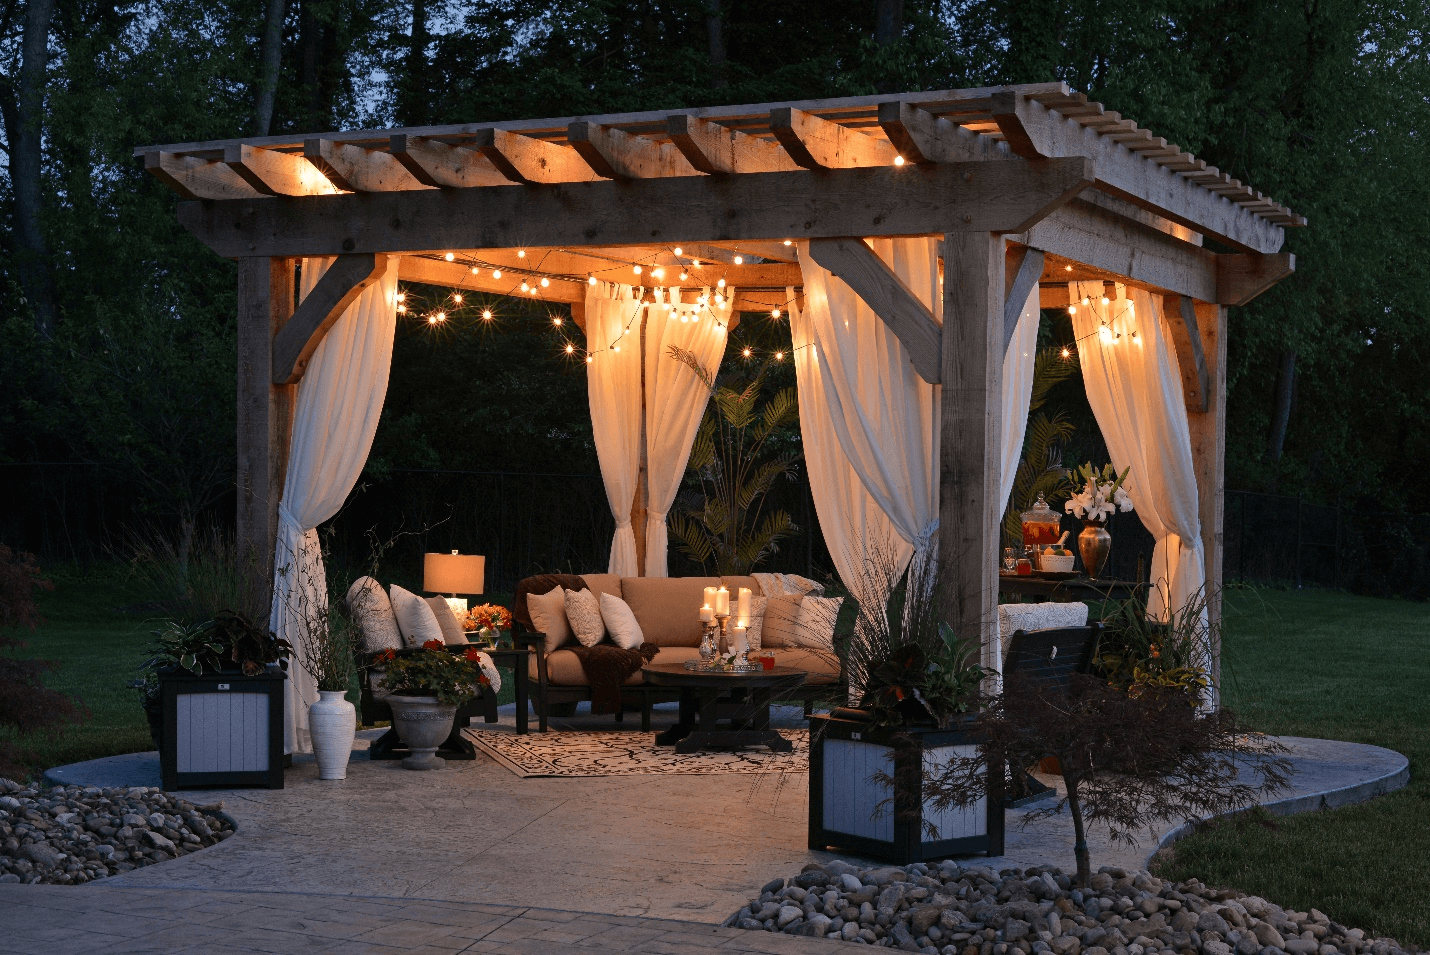 10 Ways to Use LED String Lights for Magical Patios and Special Events